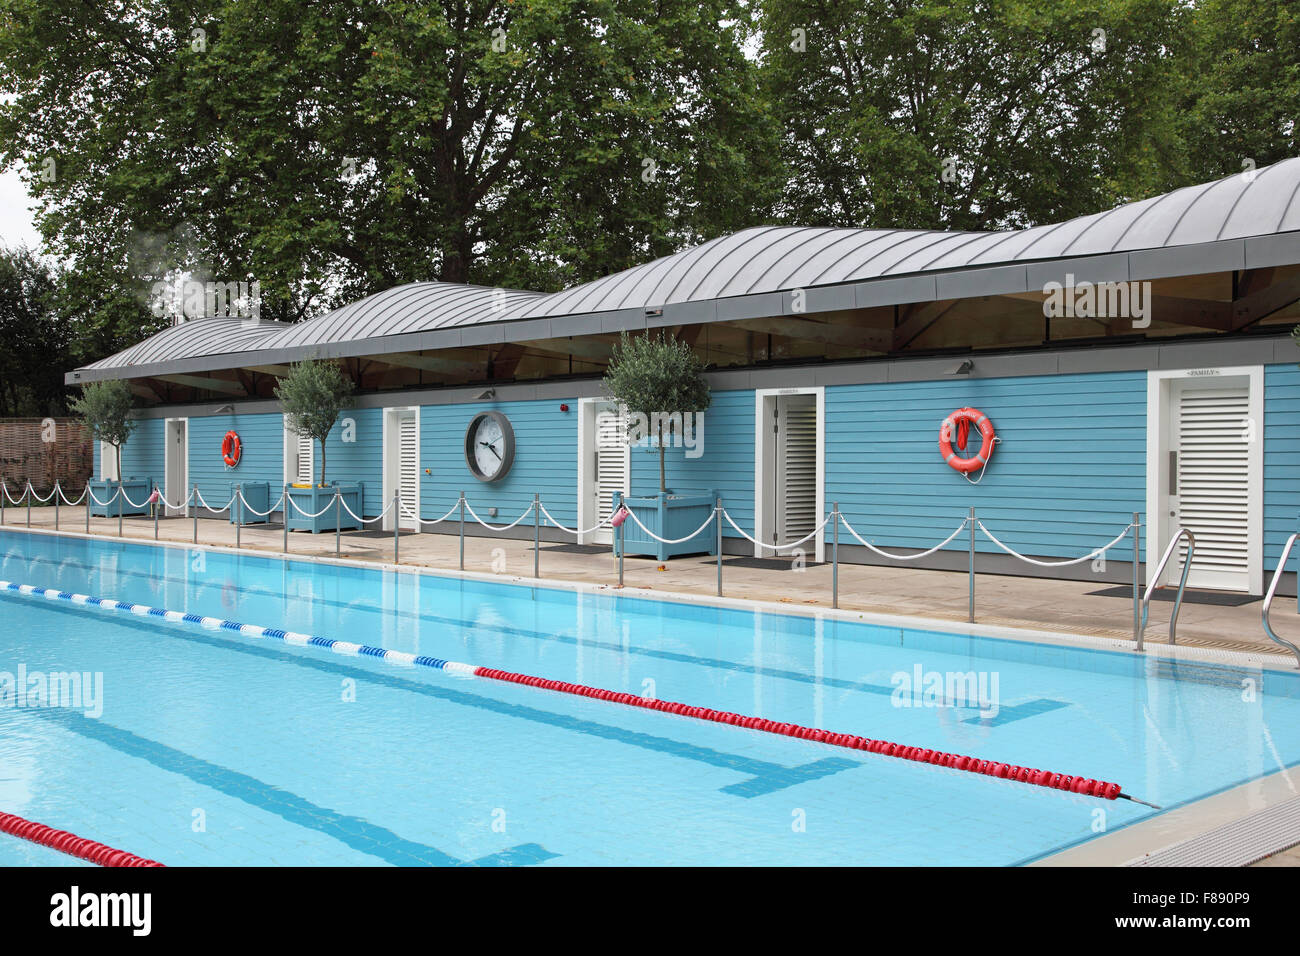 A private open-air swimming pool with a distinctive zinc-roofed changing room block. Stock Photo